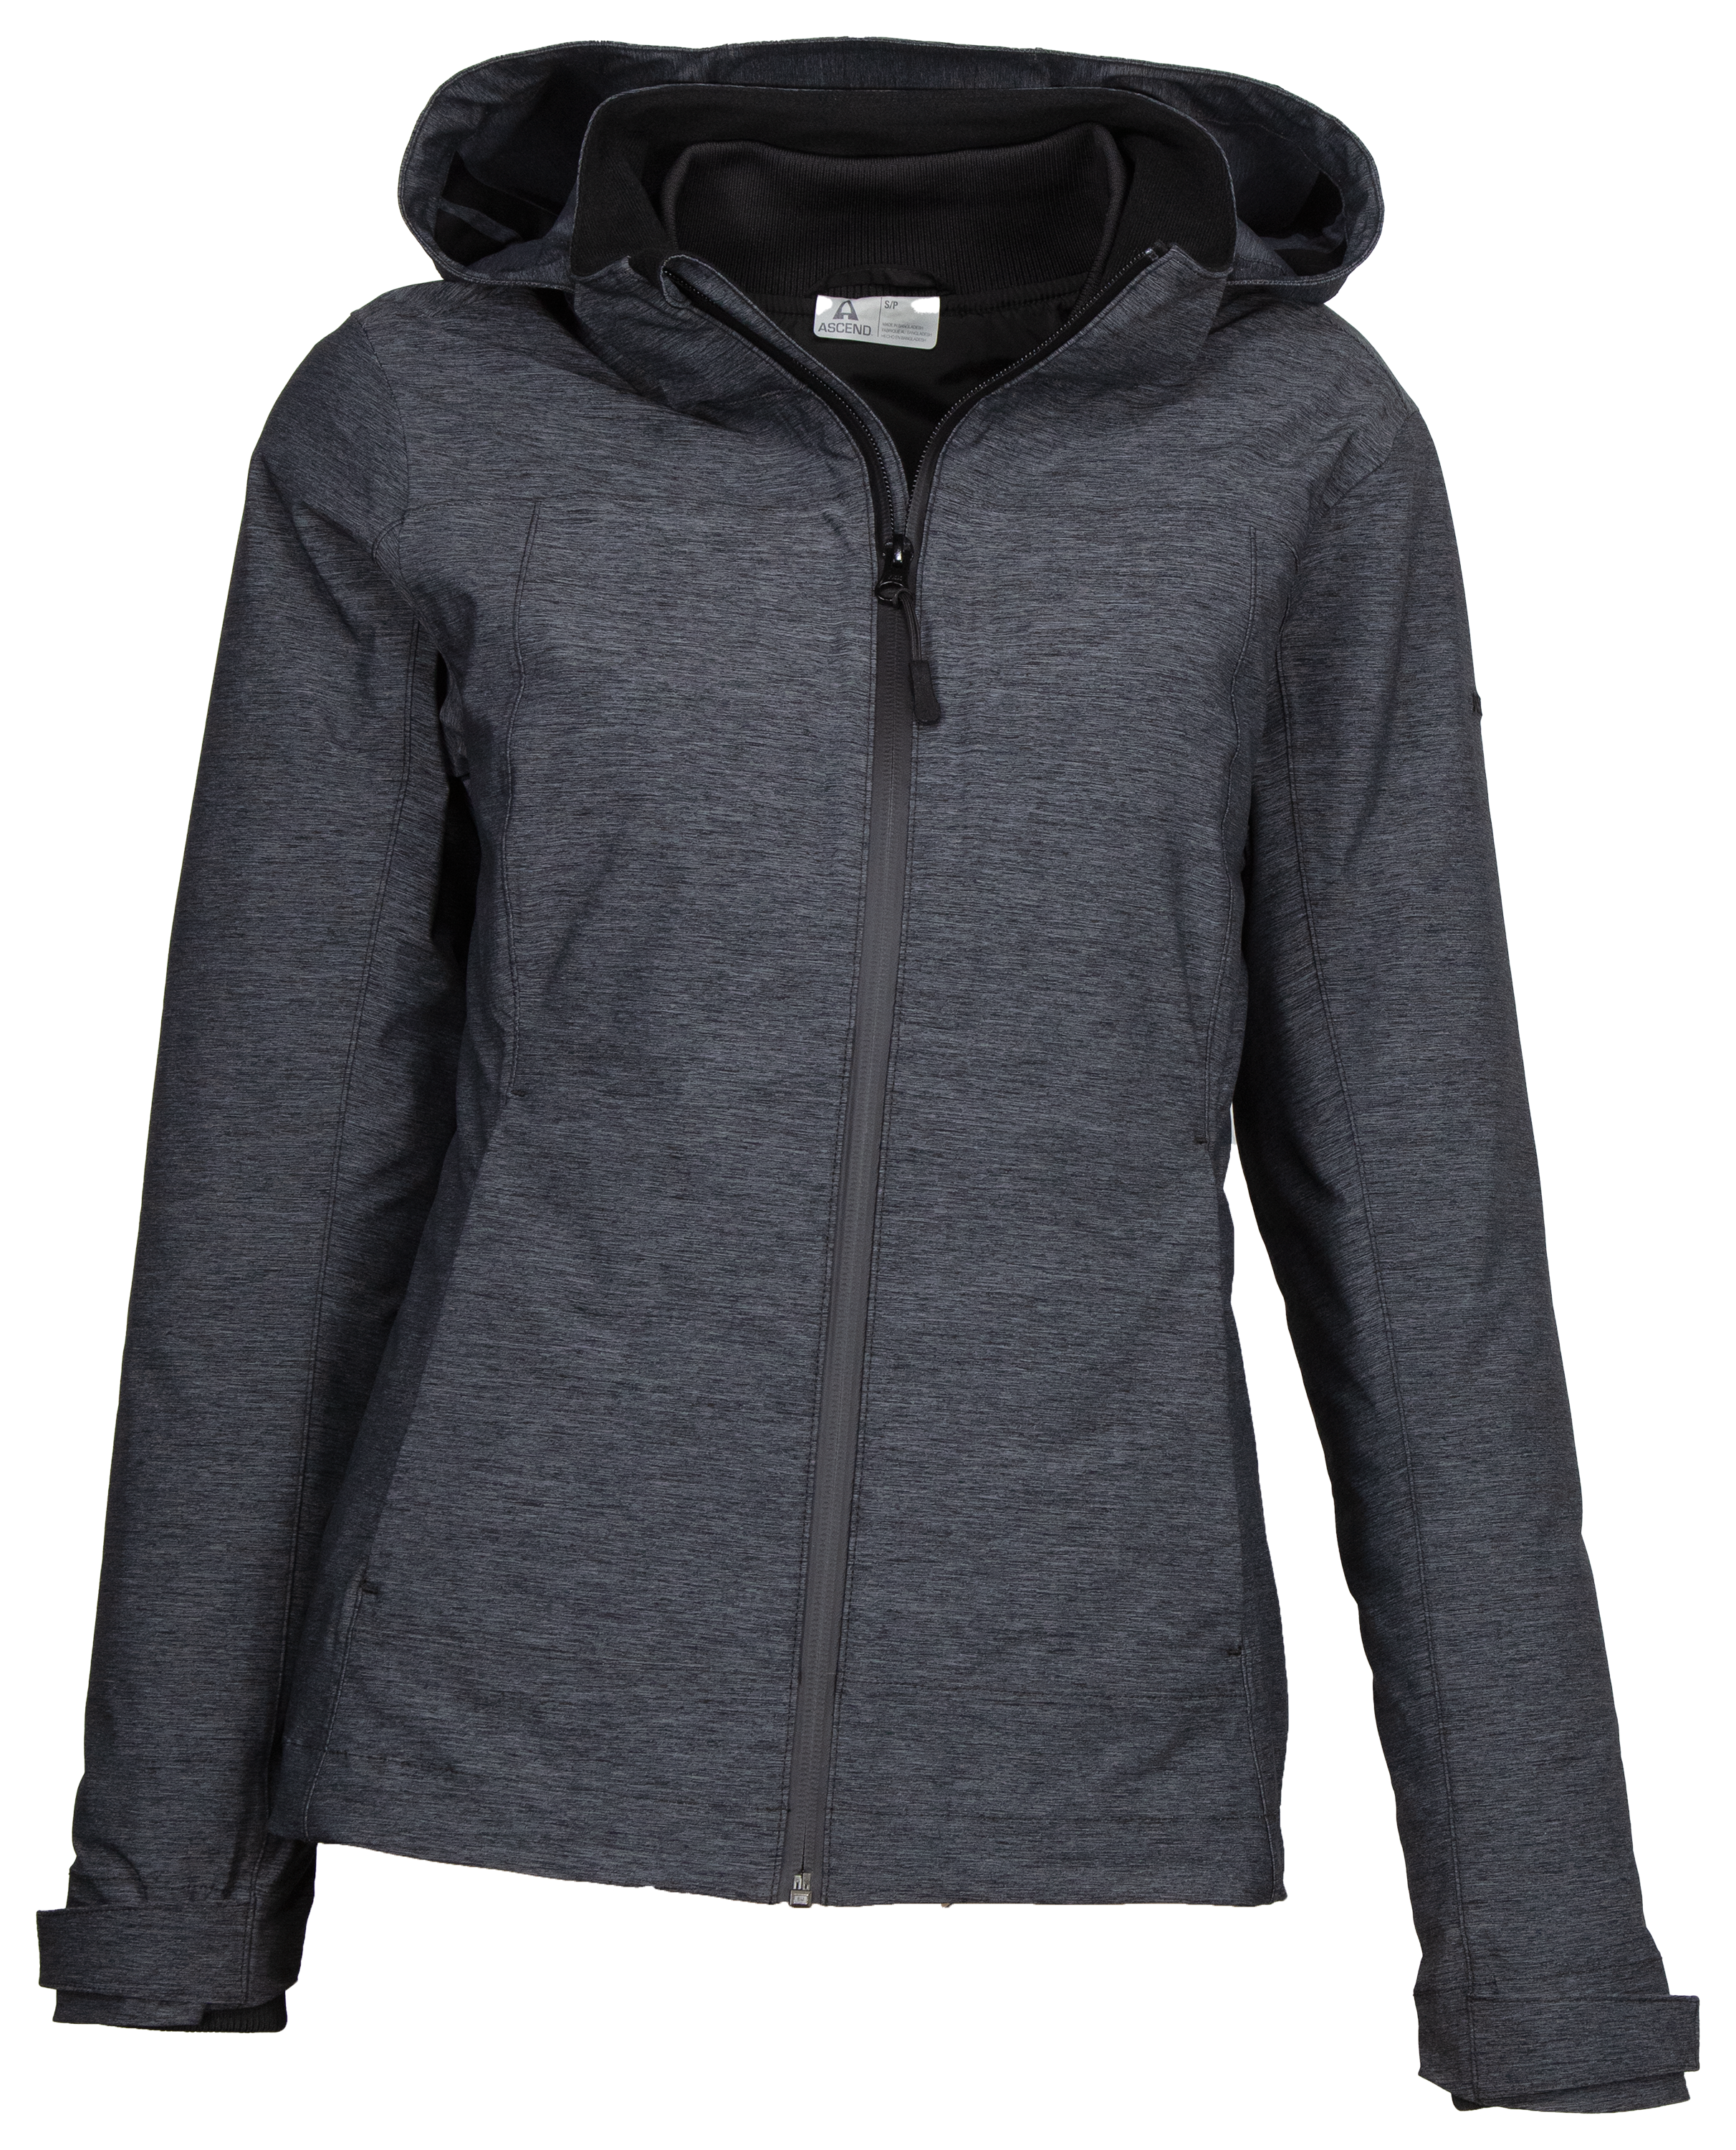 Ascend 3-in-1 Performance Jacket for Ladies | Cabela's